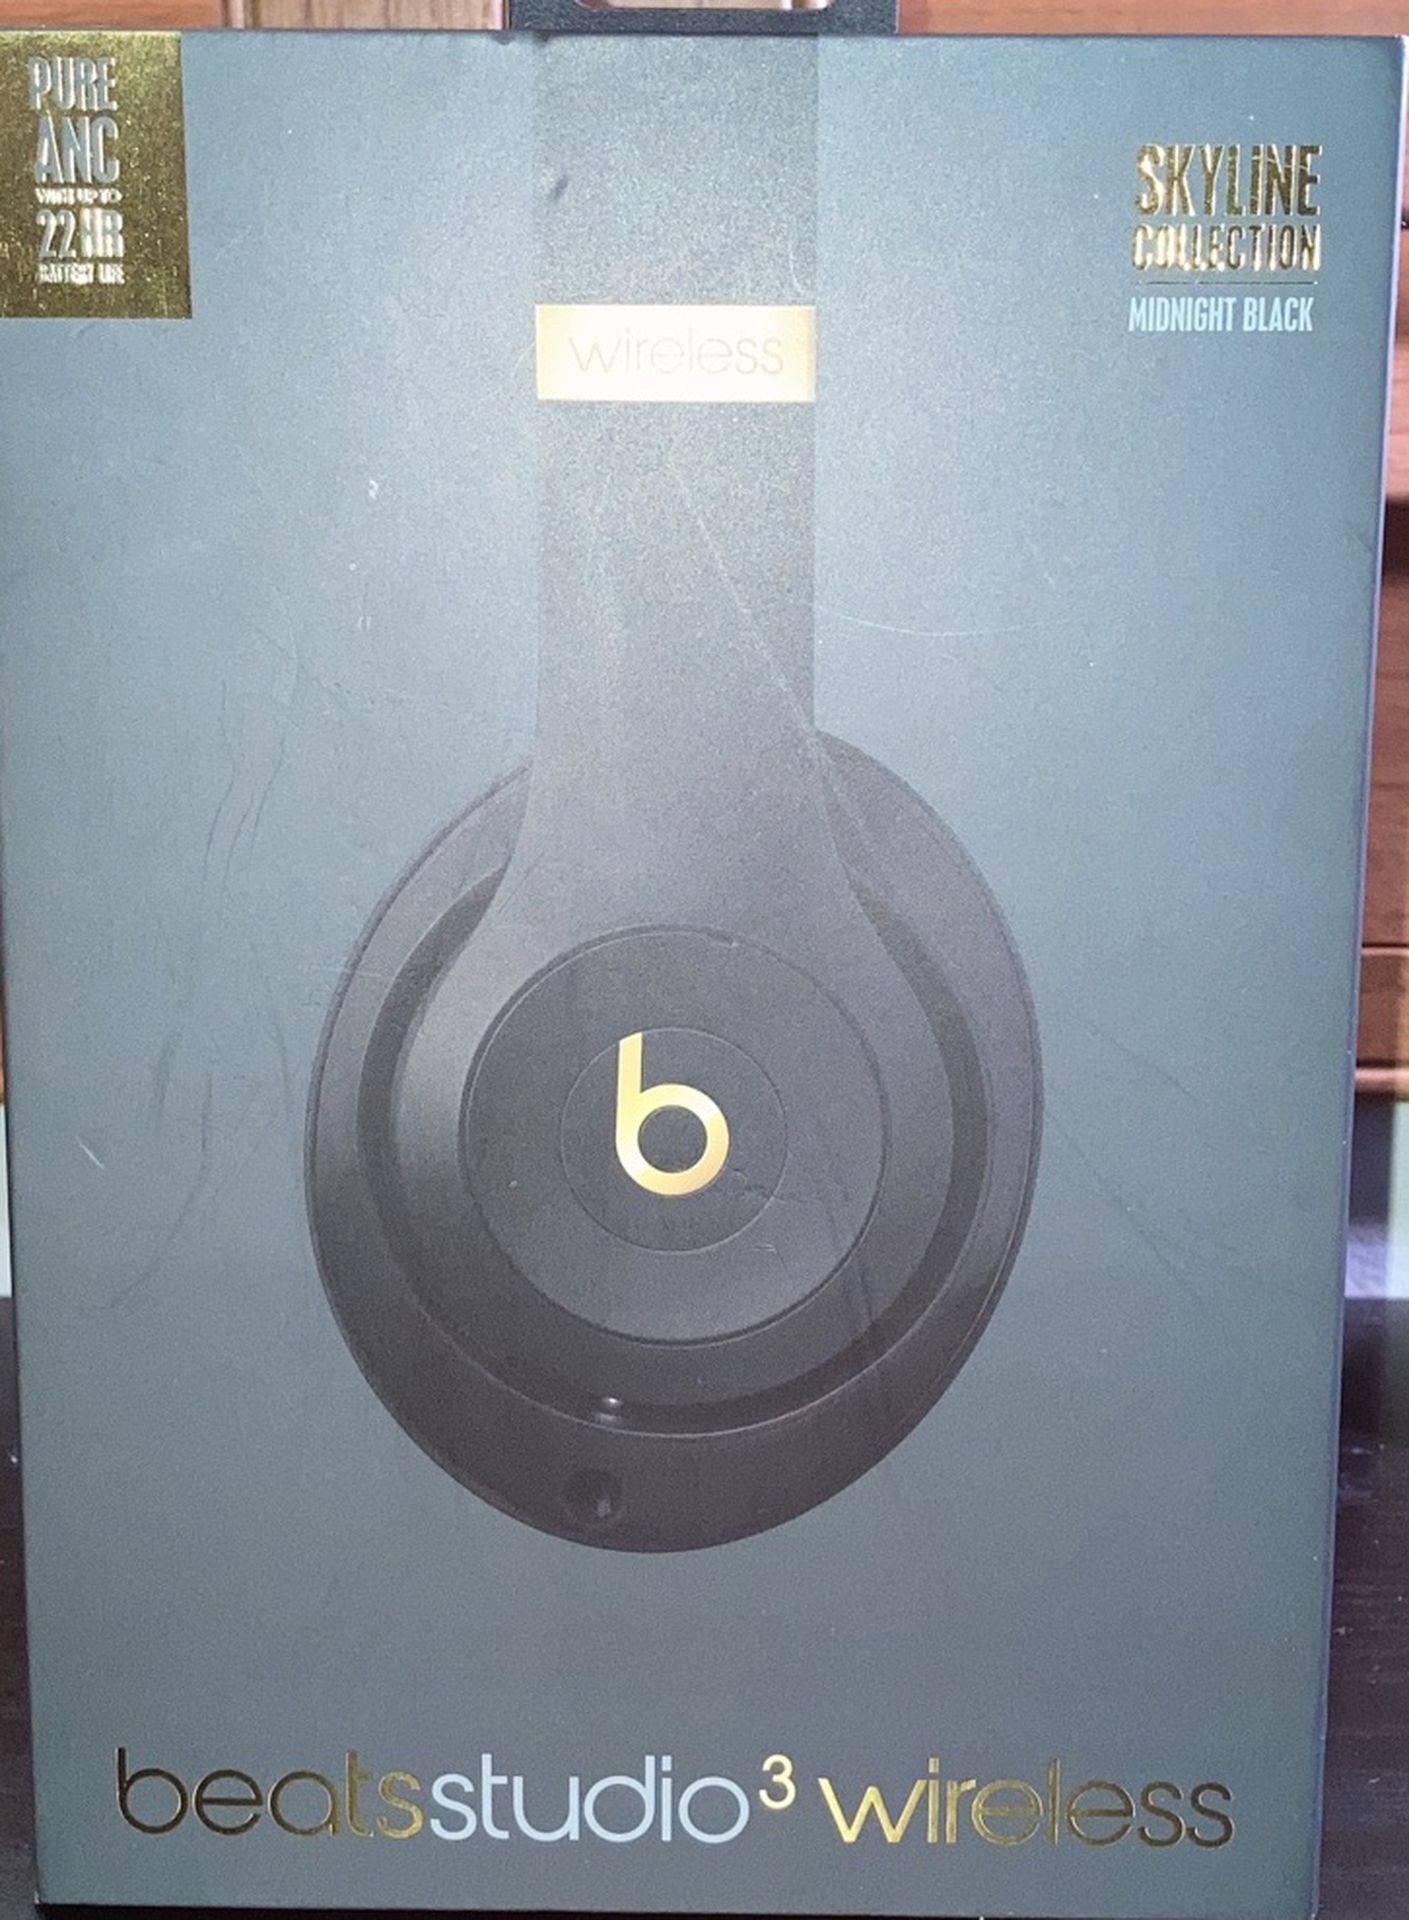 Beats studio 3 Wireless/Midnight Black/SkyLine Collection/No Damages 100% CLEAN/No response Item Will Go To Next Person/